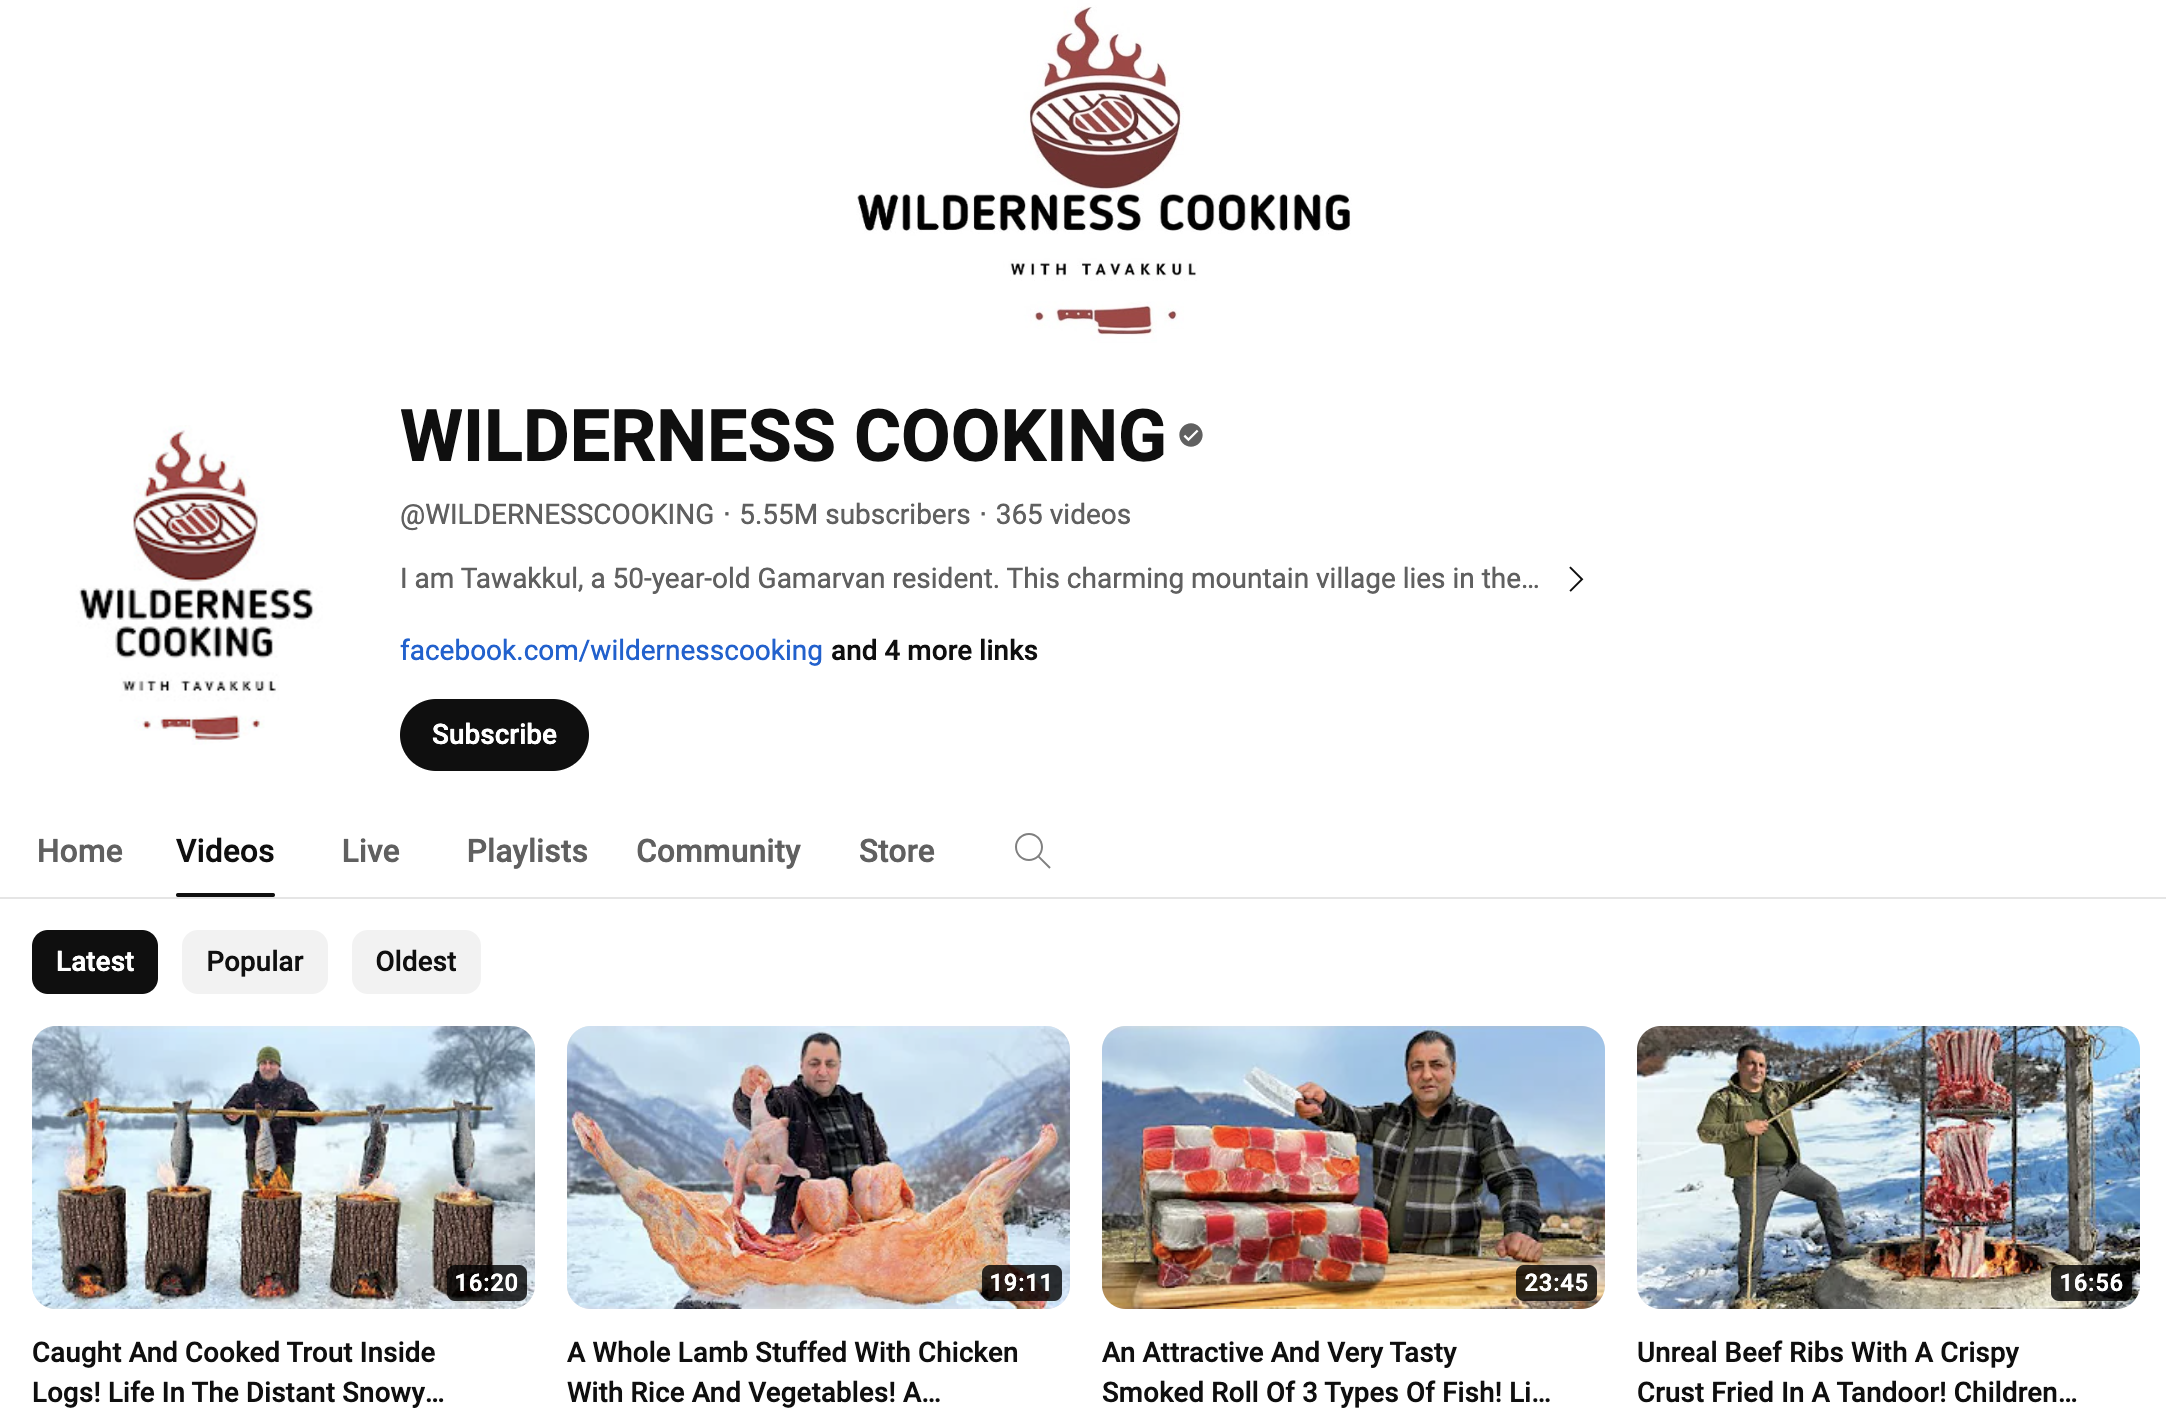 Screenshot of video page for YouTube cooking channel Wilderness Cooking